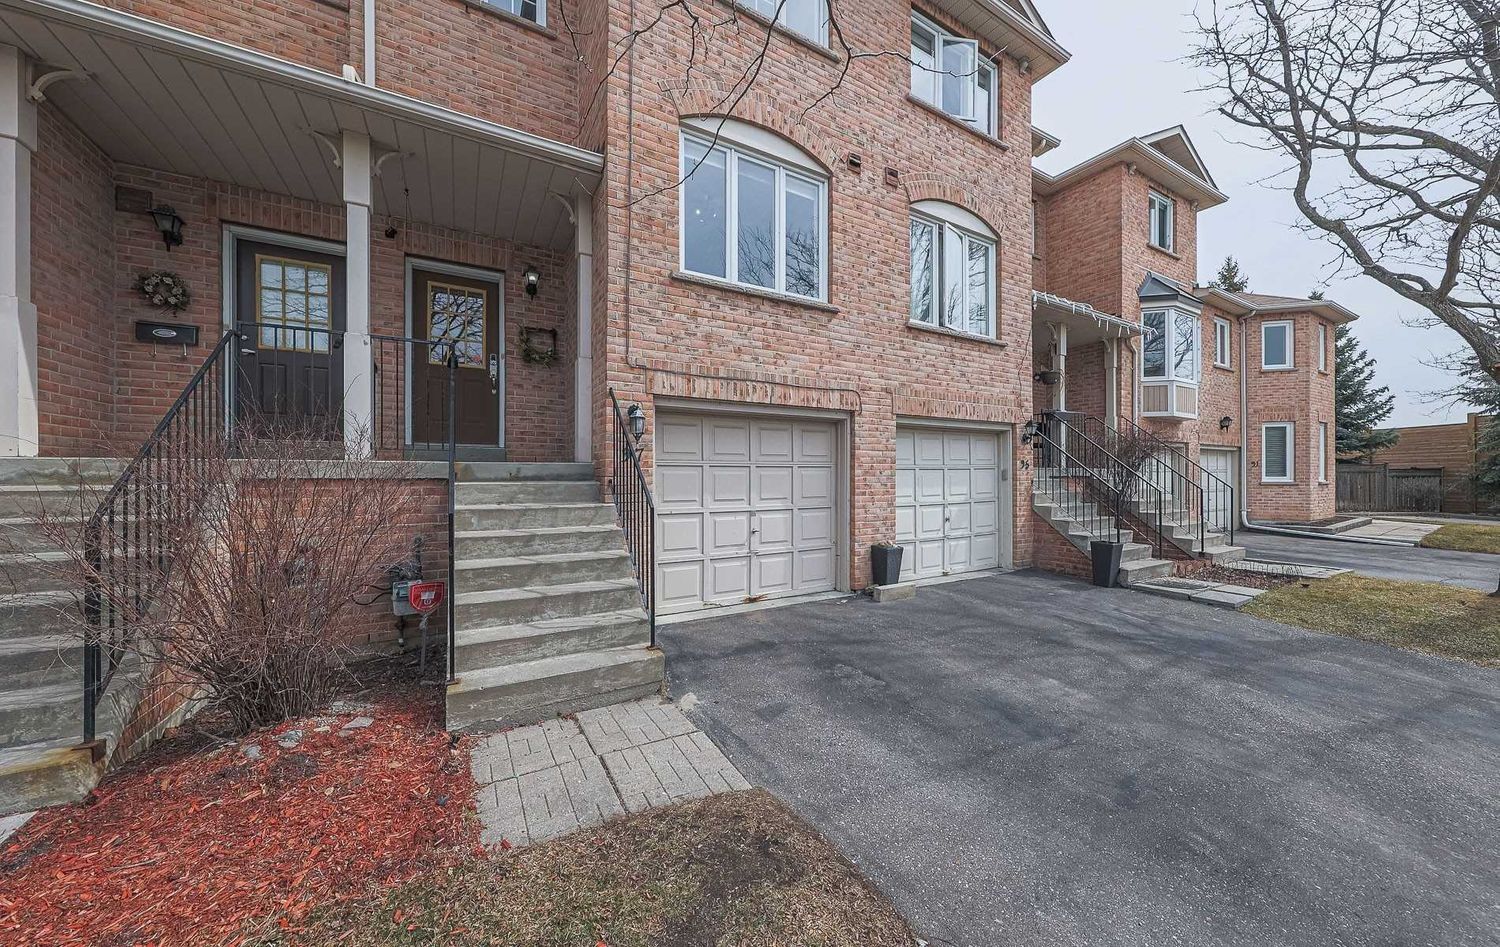 1-150 Rougehaven Way. Rougehaven Way Townhomes is located in  Markham, Toronto - image #2 of 2